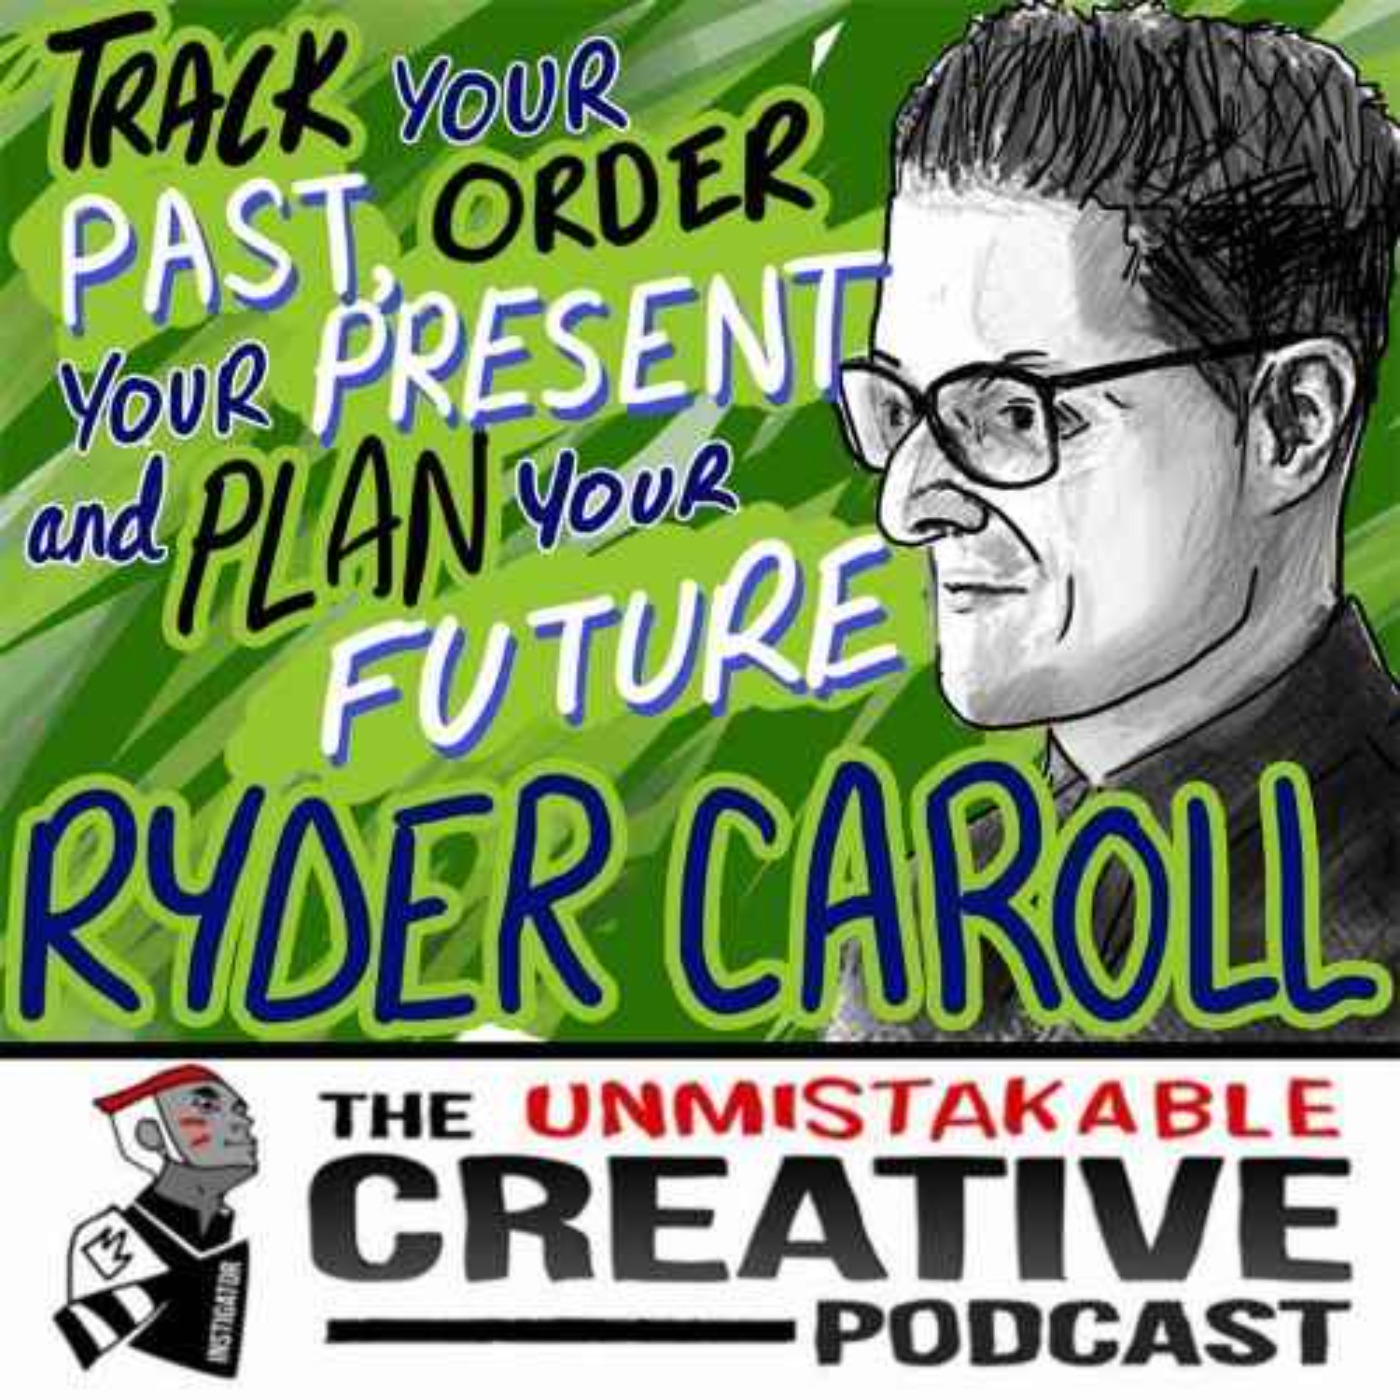 The Knowledge Management Series: Ryder Carroll | Track Your Past, Order Your Present, and Plan Your Future Image